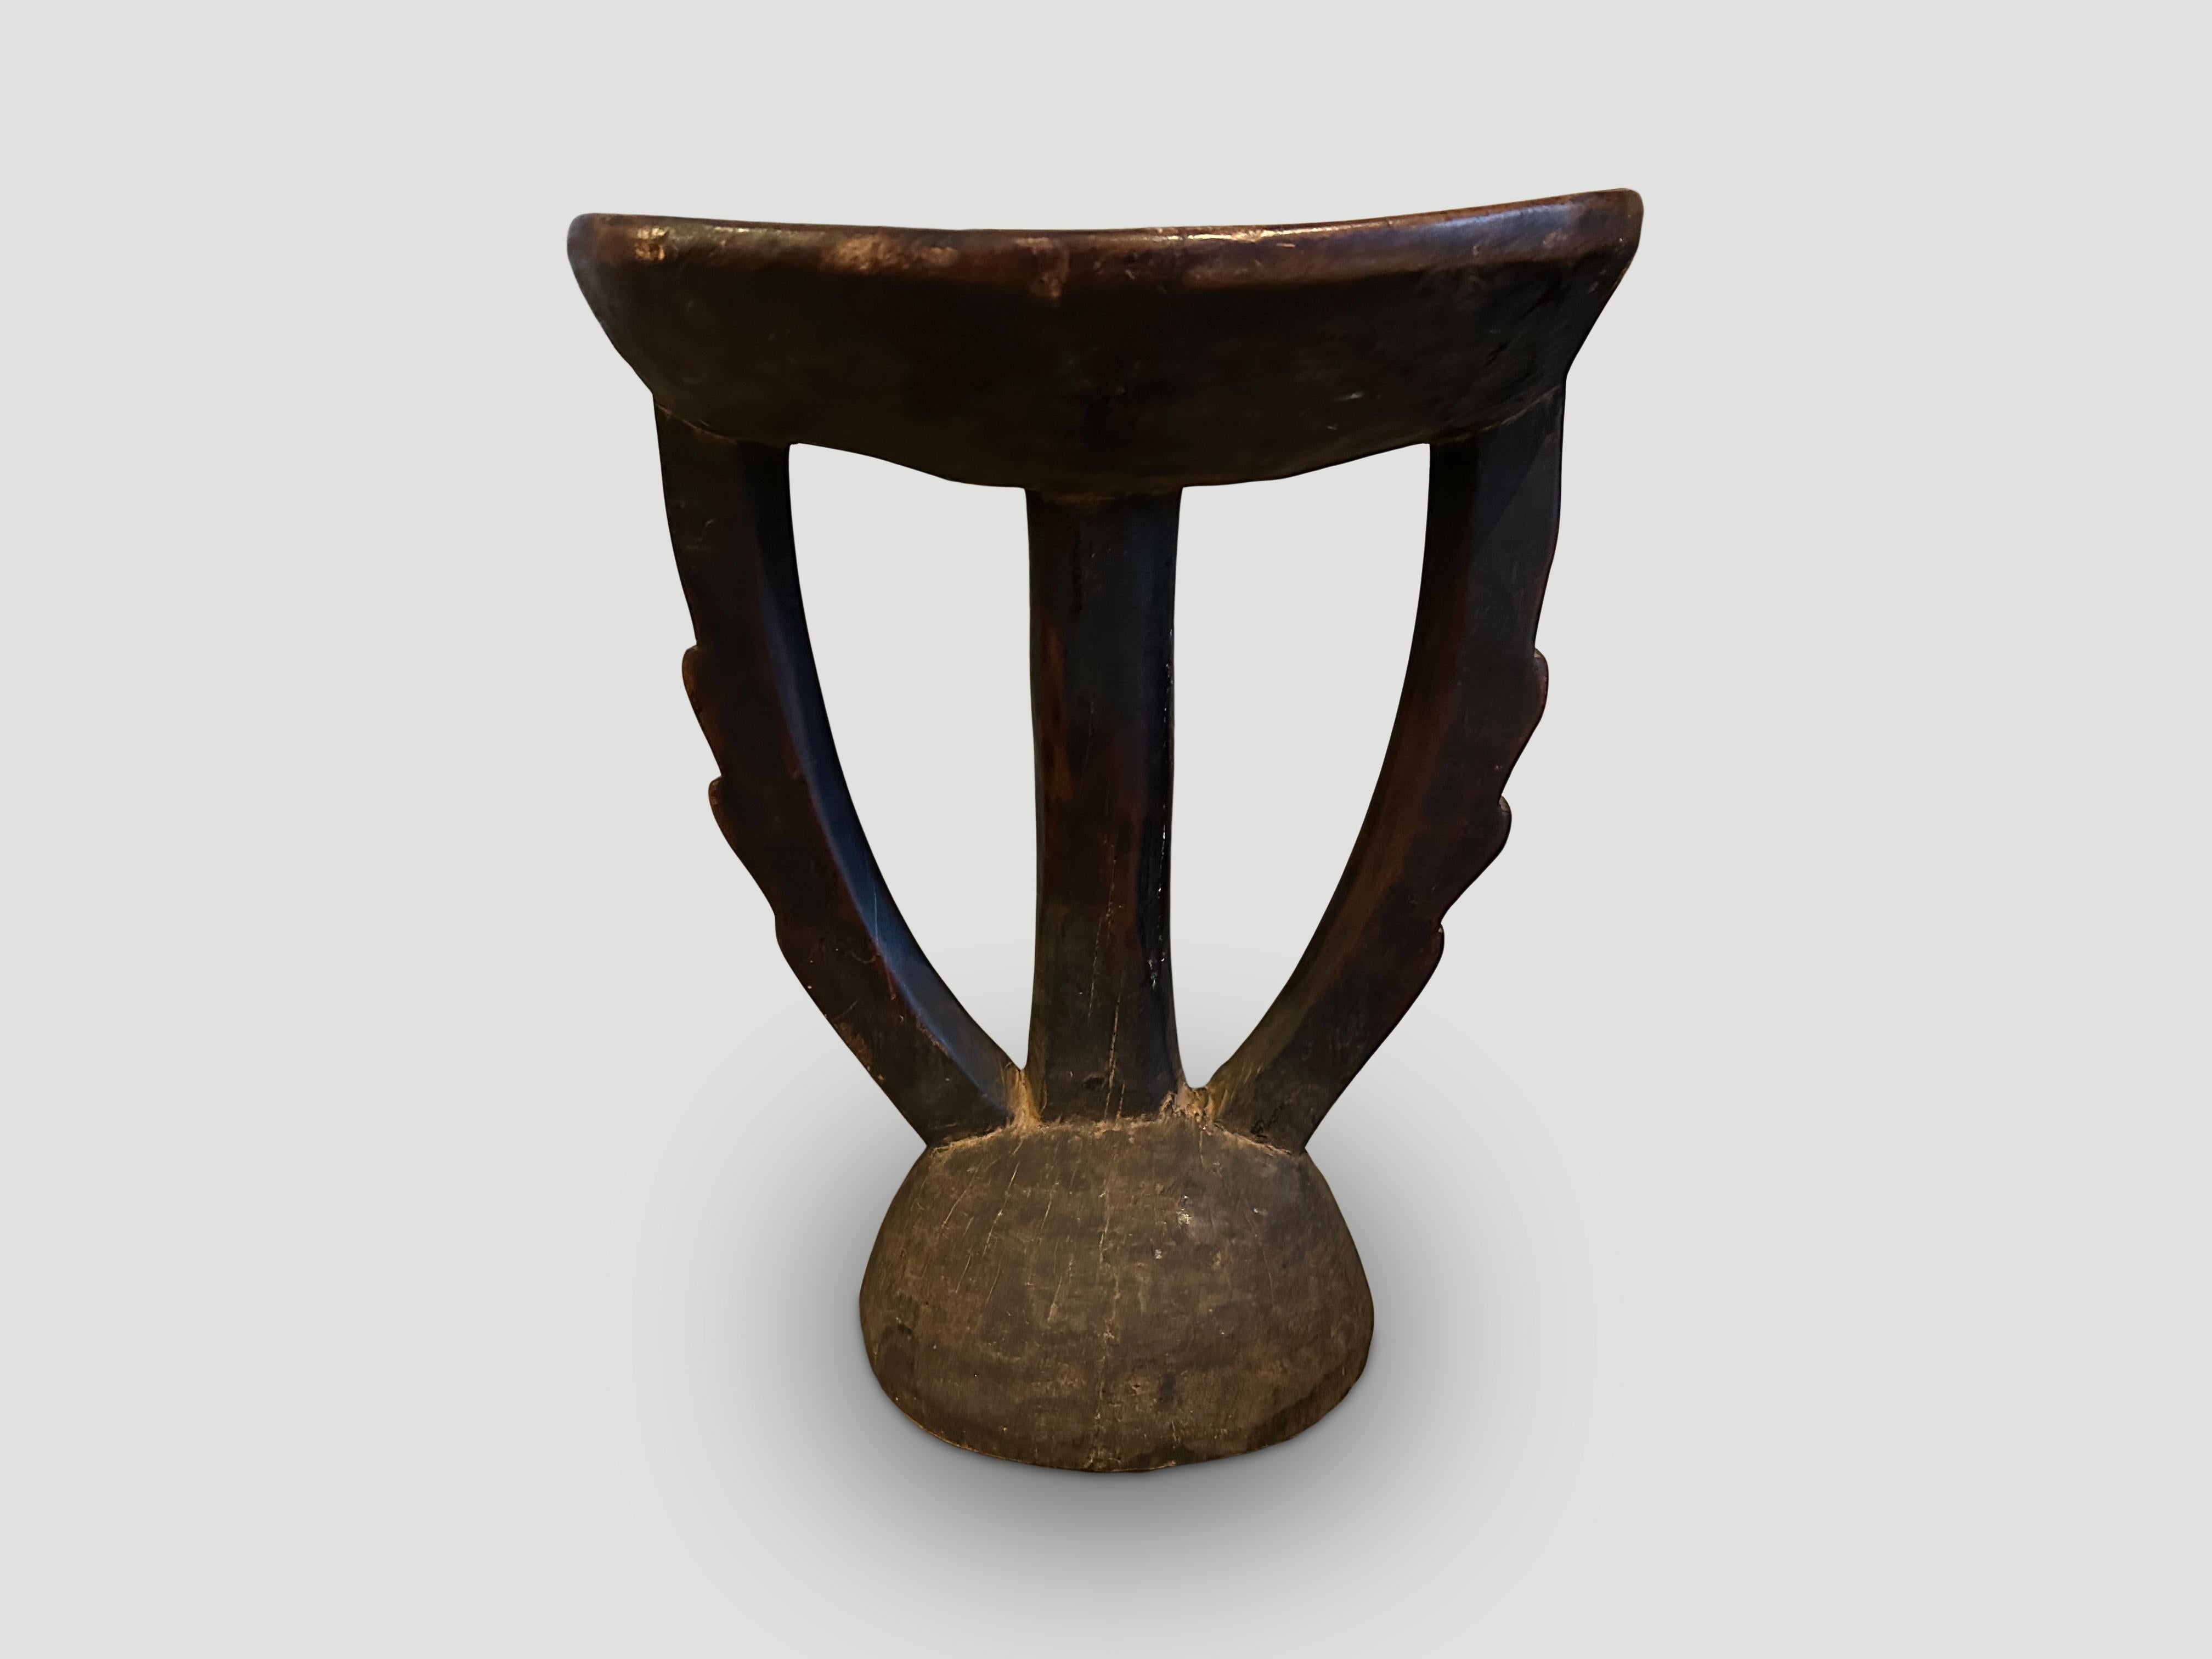 Beautiful African antique side table that is both usable and sculptural. Lovely patina on this unusual piece. The top is 13